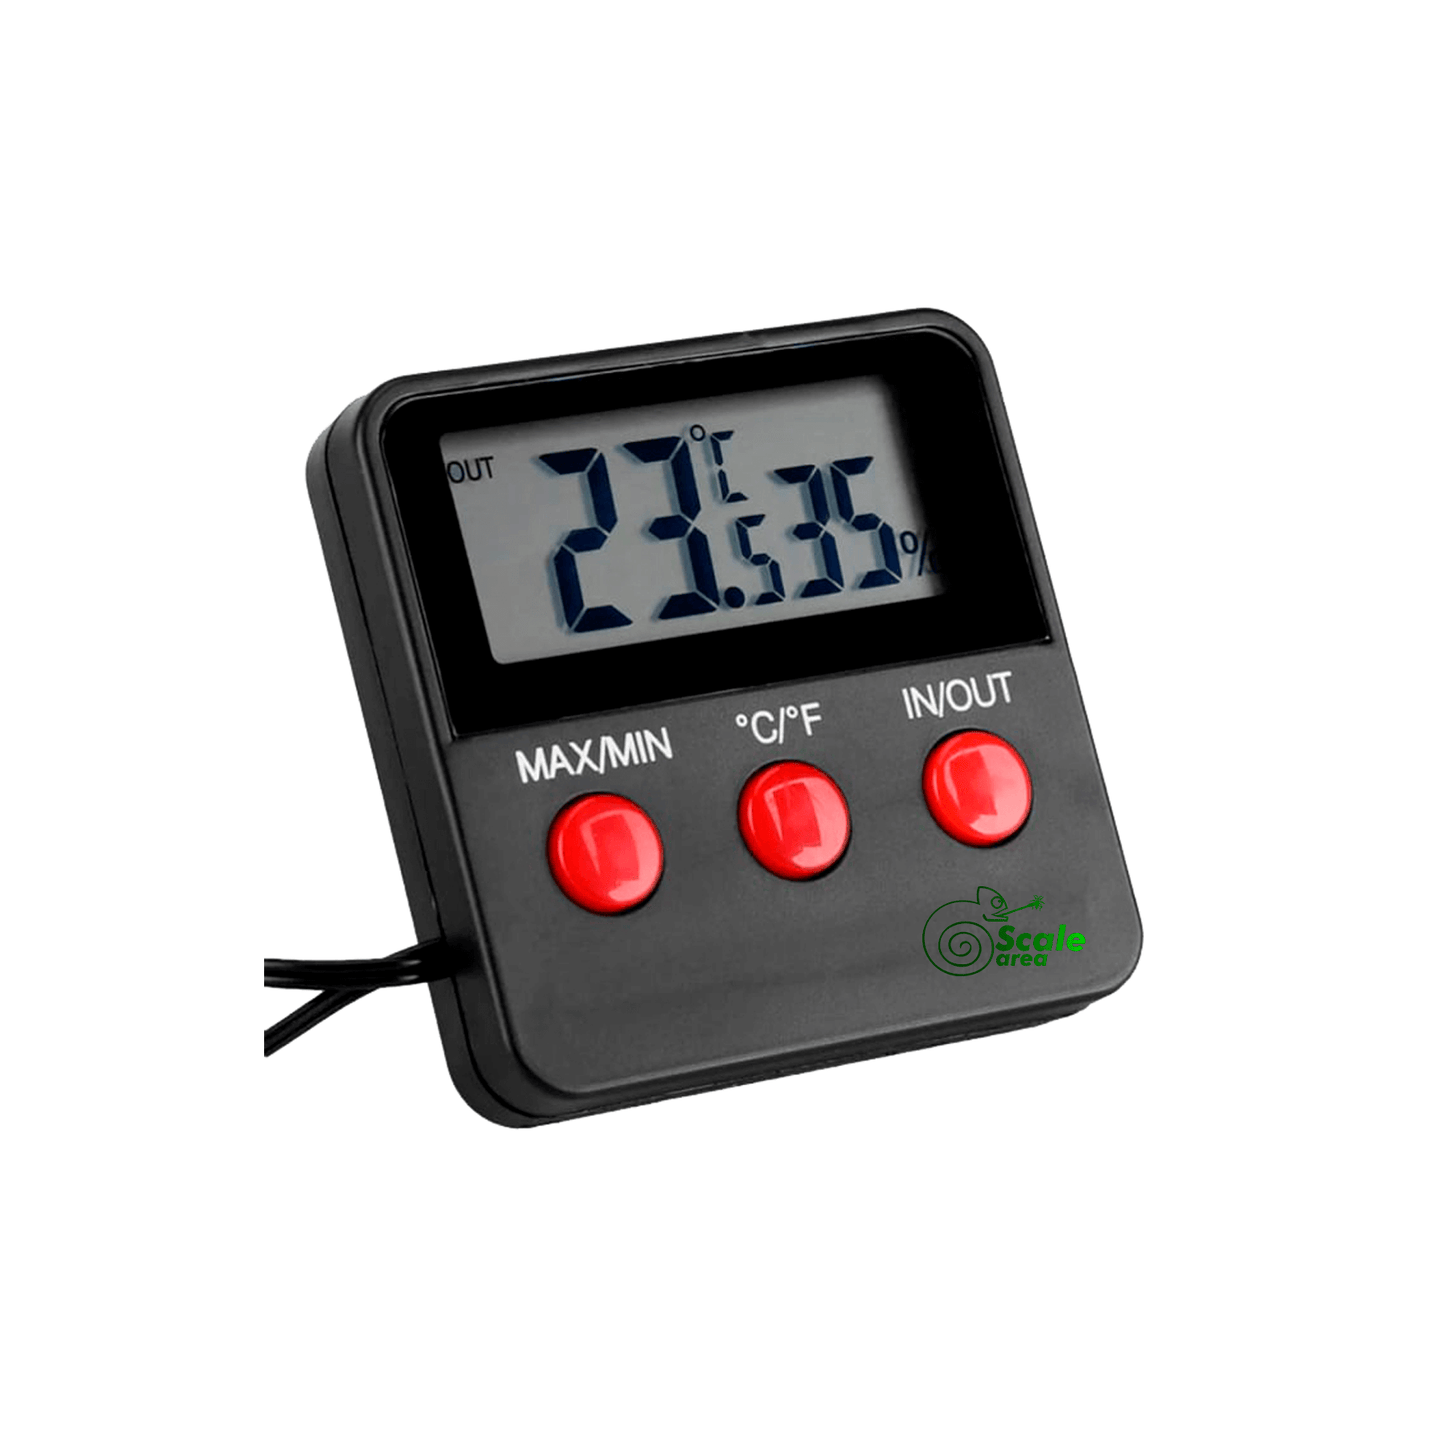 Digital thermometer-hygrometer with probe